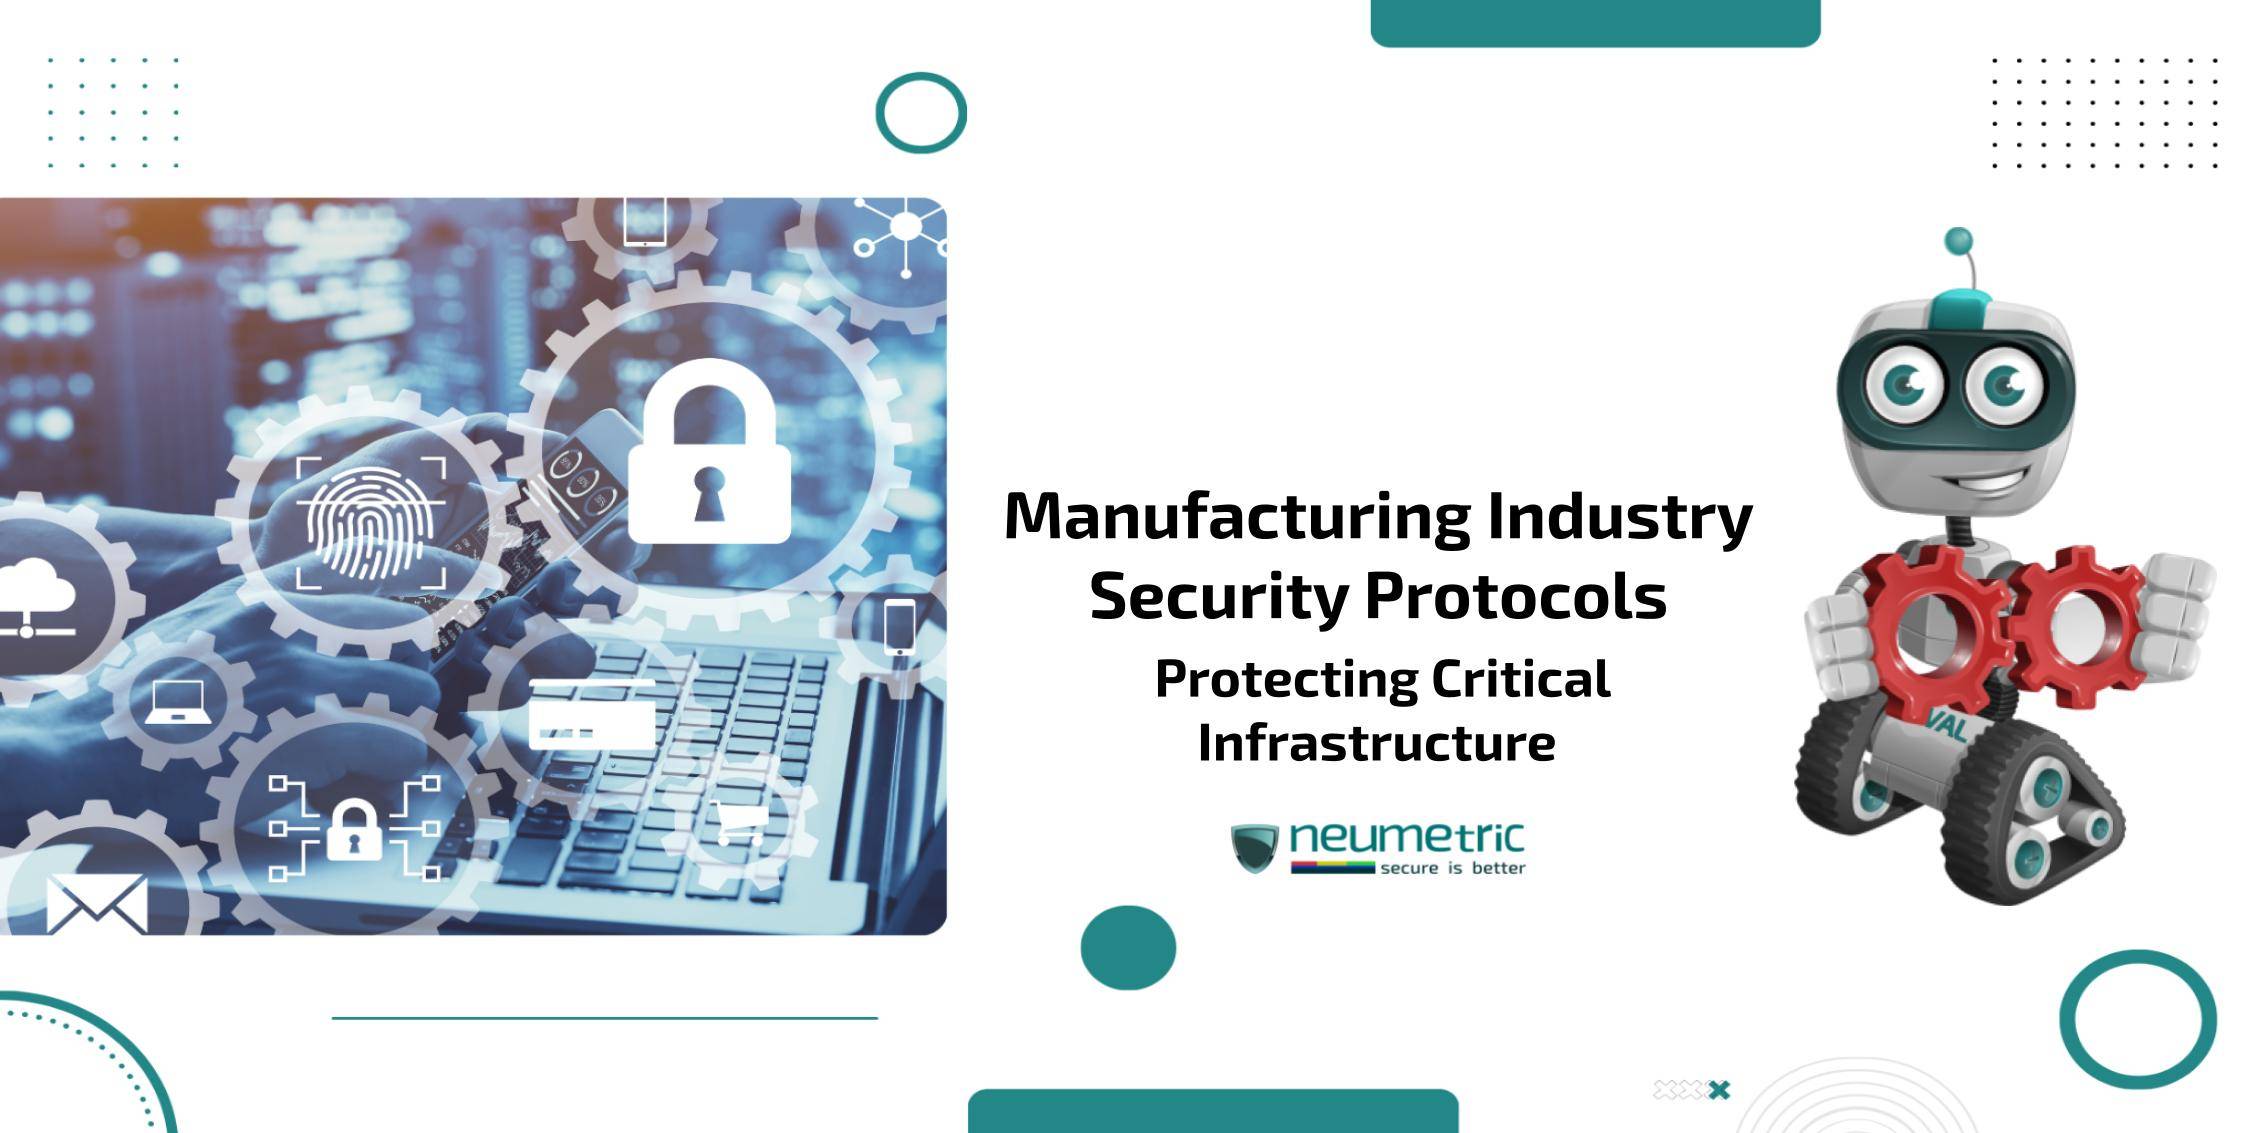 Manufacturing Industry Security Protocols: Protecting Critical Infrastructure